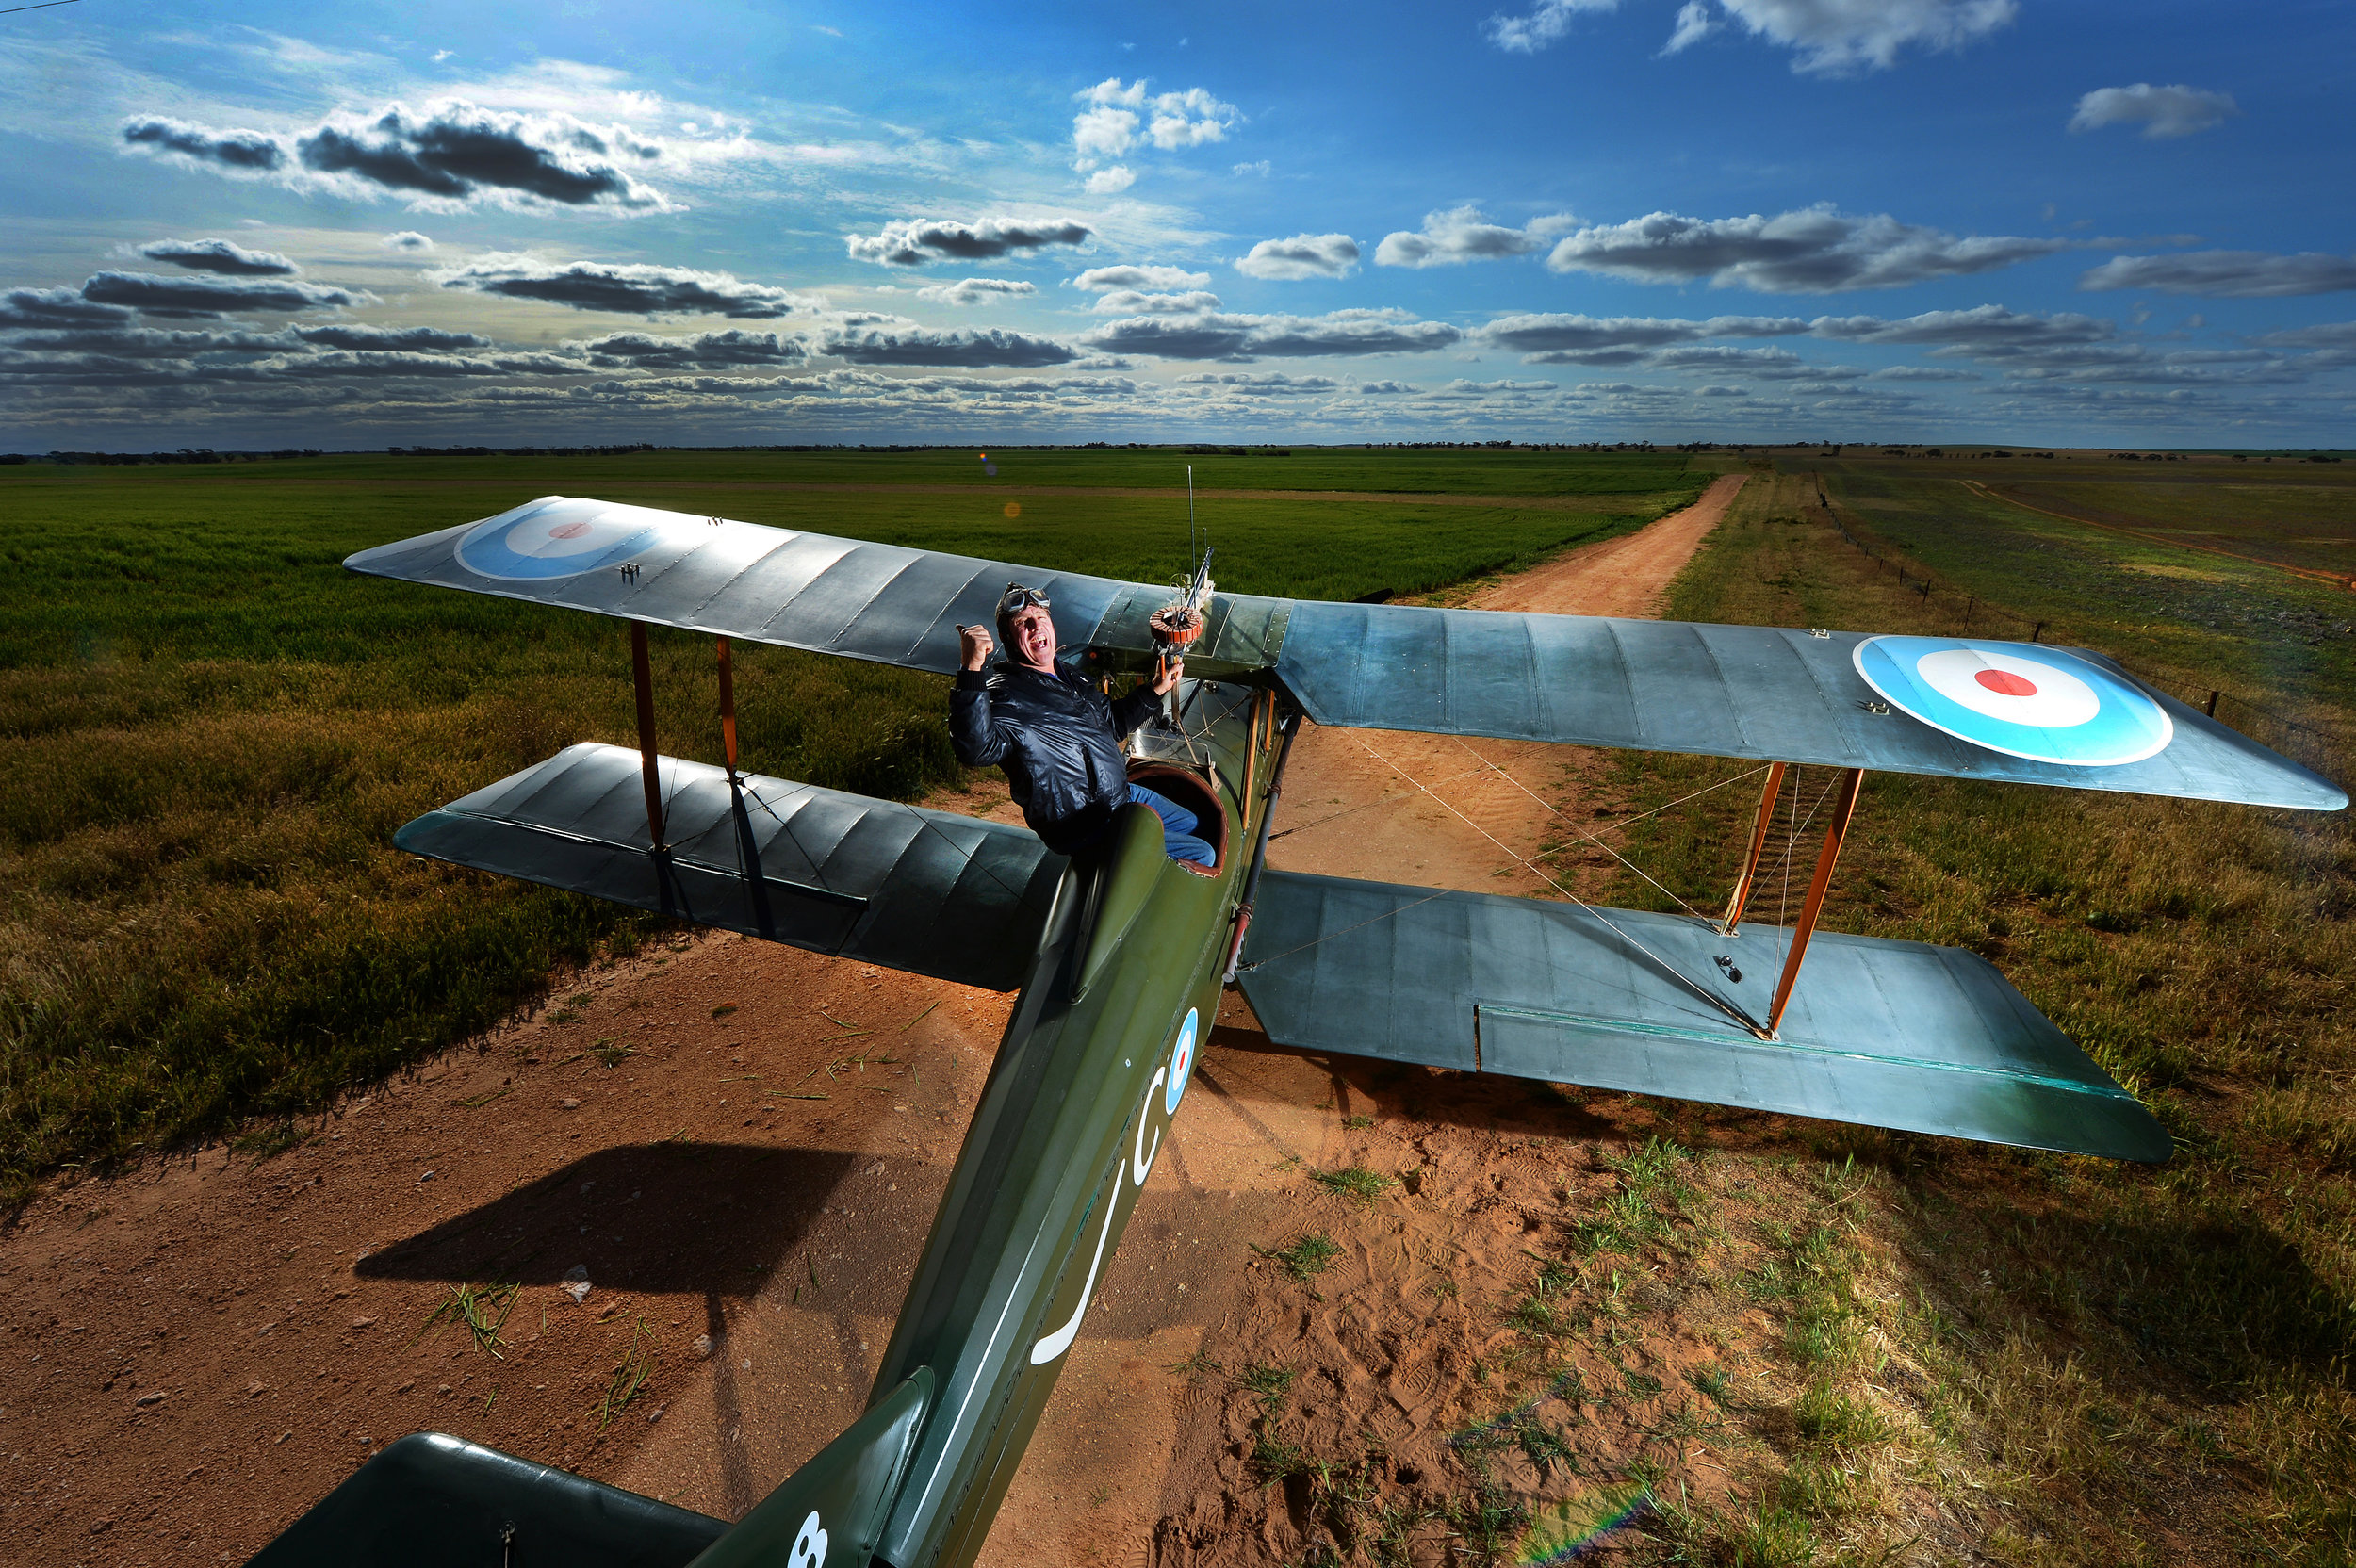 CHP_Export_89833219_HS25 Mark McCleary with his WWI replica SE5a plane..jpg